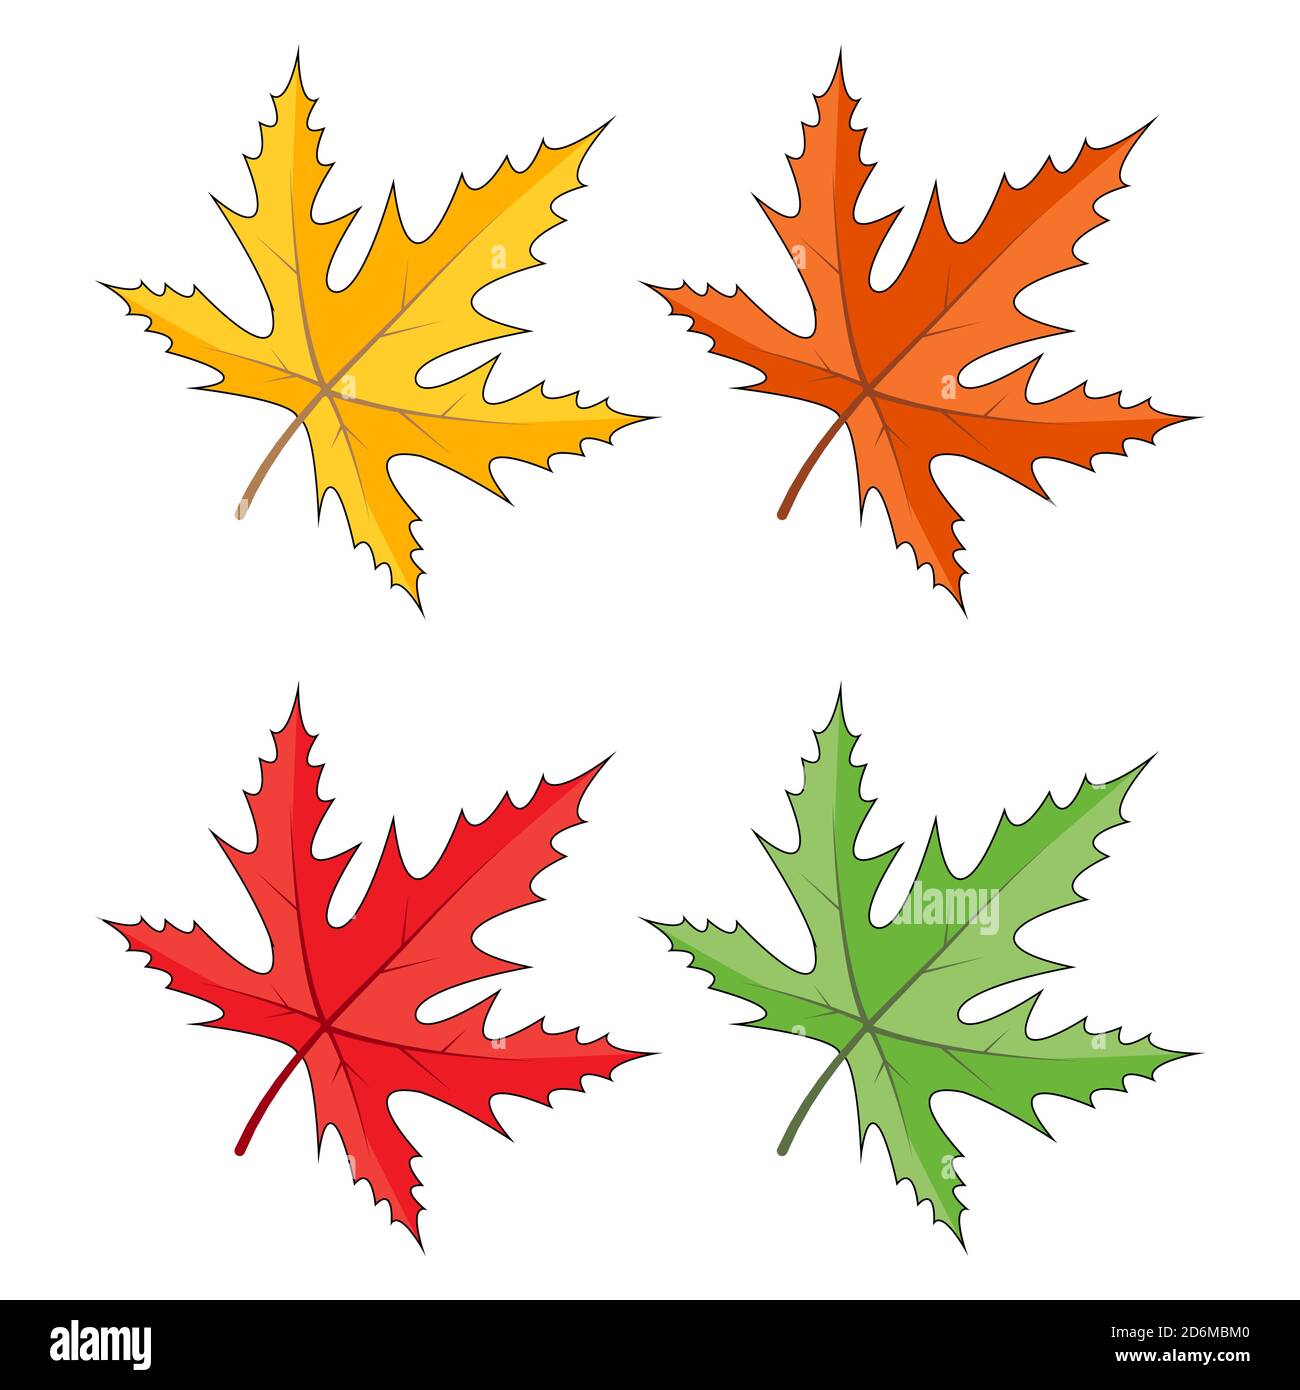 Maple leaves in yellow, red and green. Vector image. 15613971